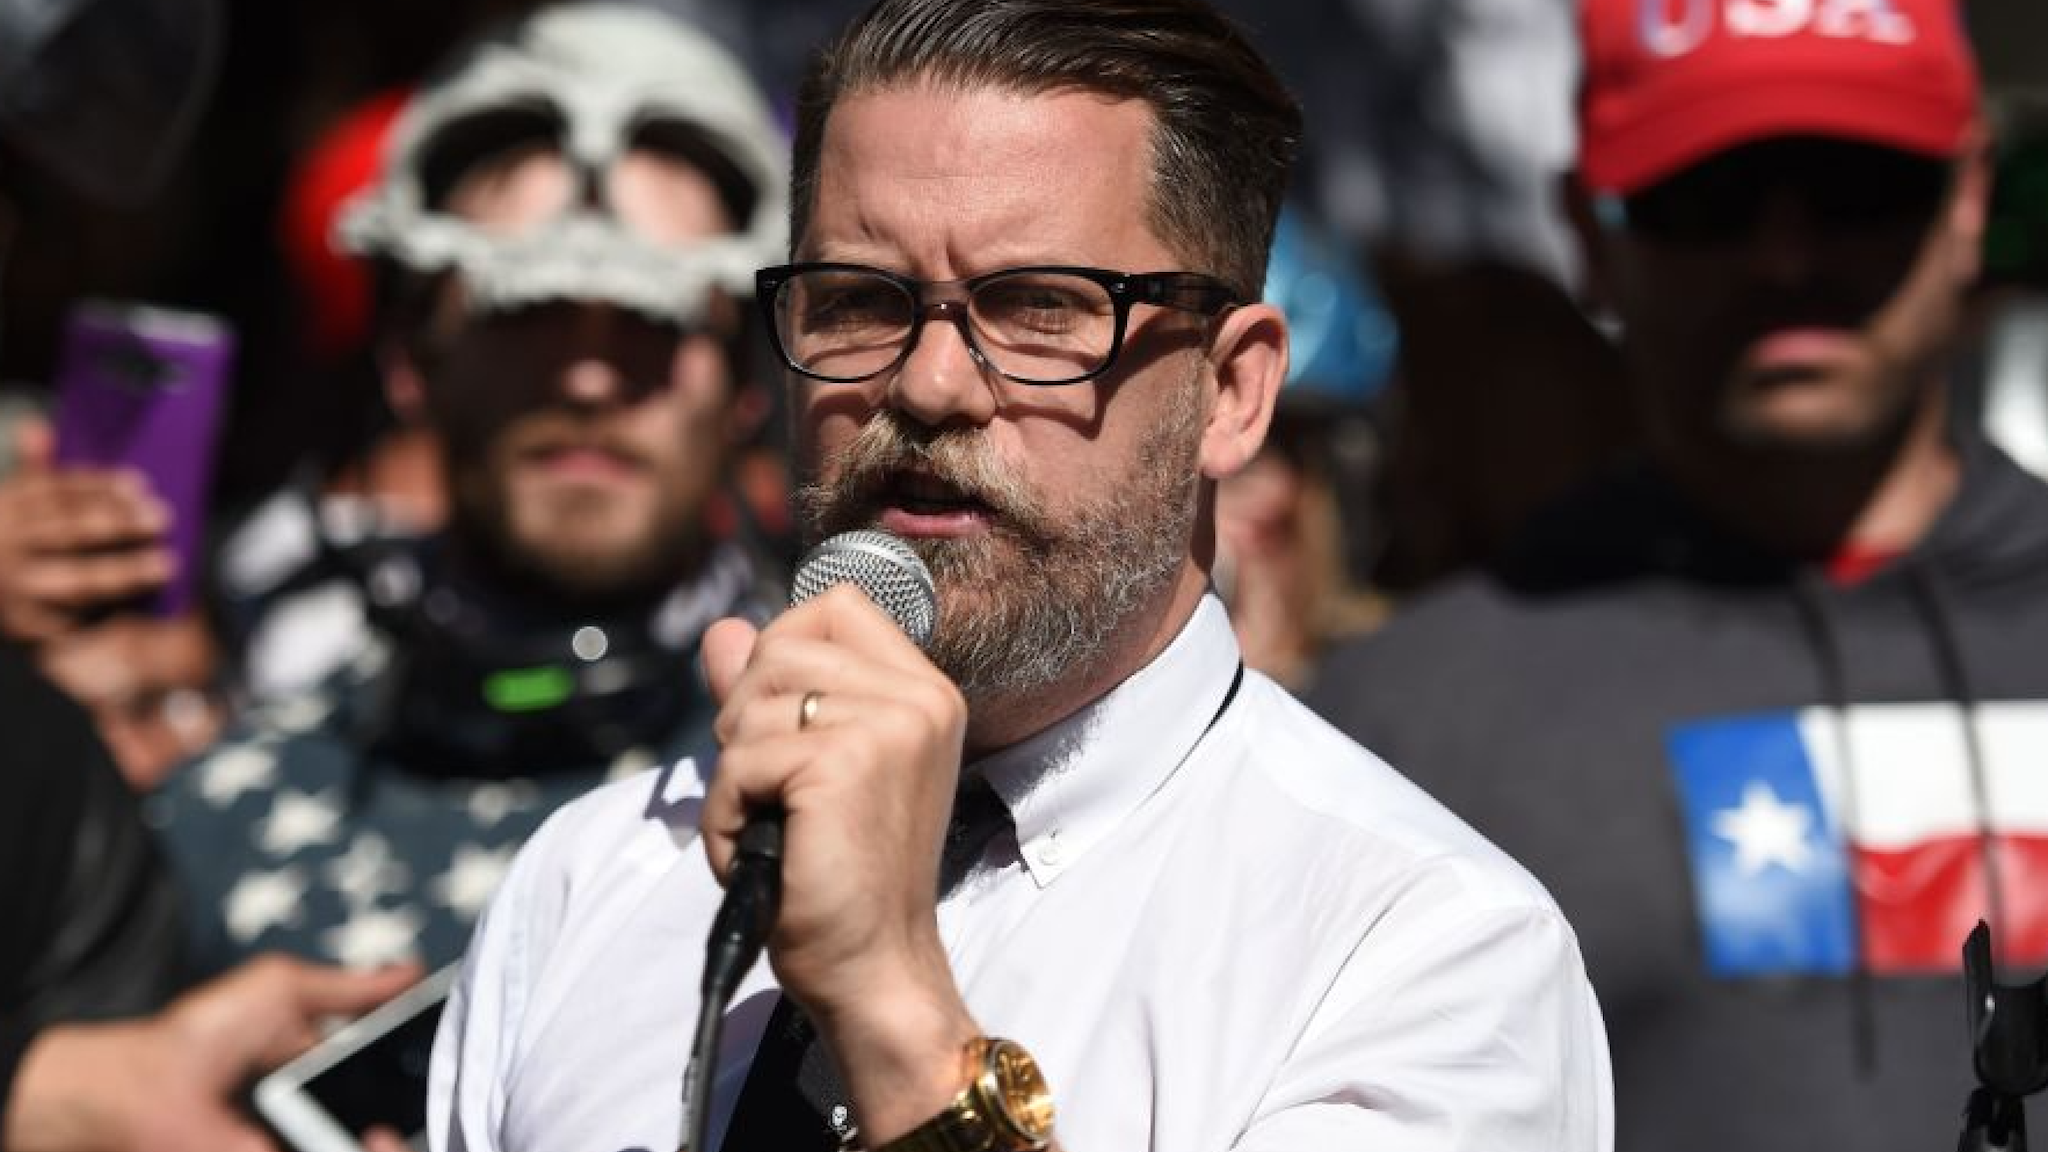 Vice Media co-founder and conservative speaker Gavin McInnes reads a speech written by Ann Coulter to a crowd during a conservative rally in Berkeley, California on April 27, 2017.